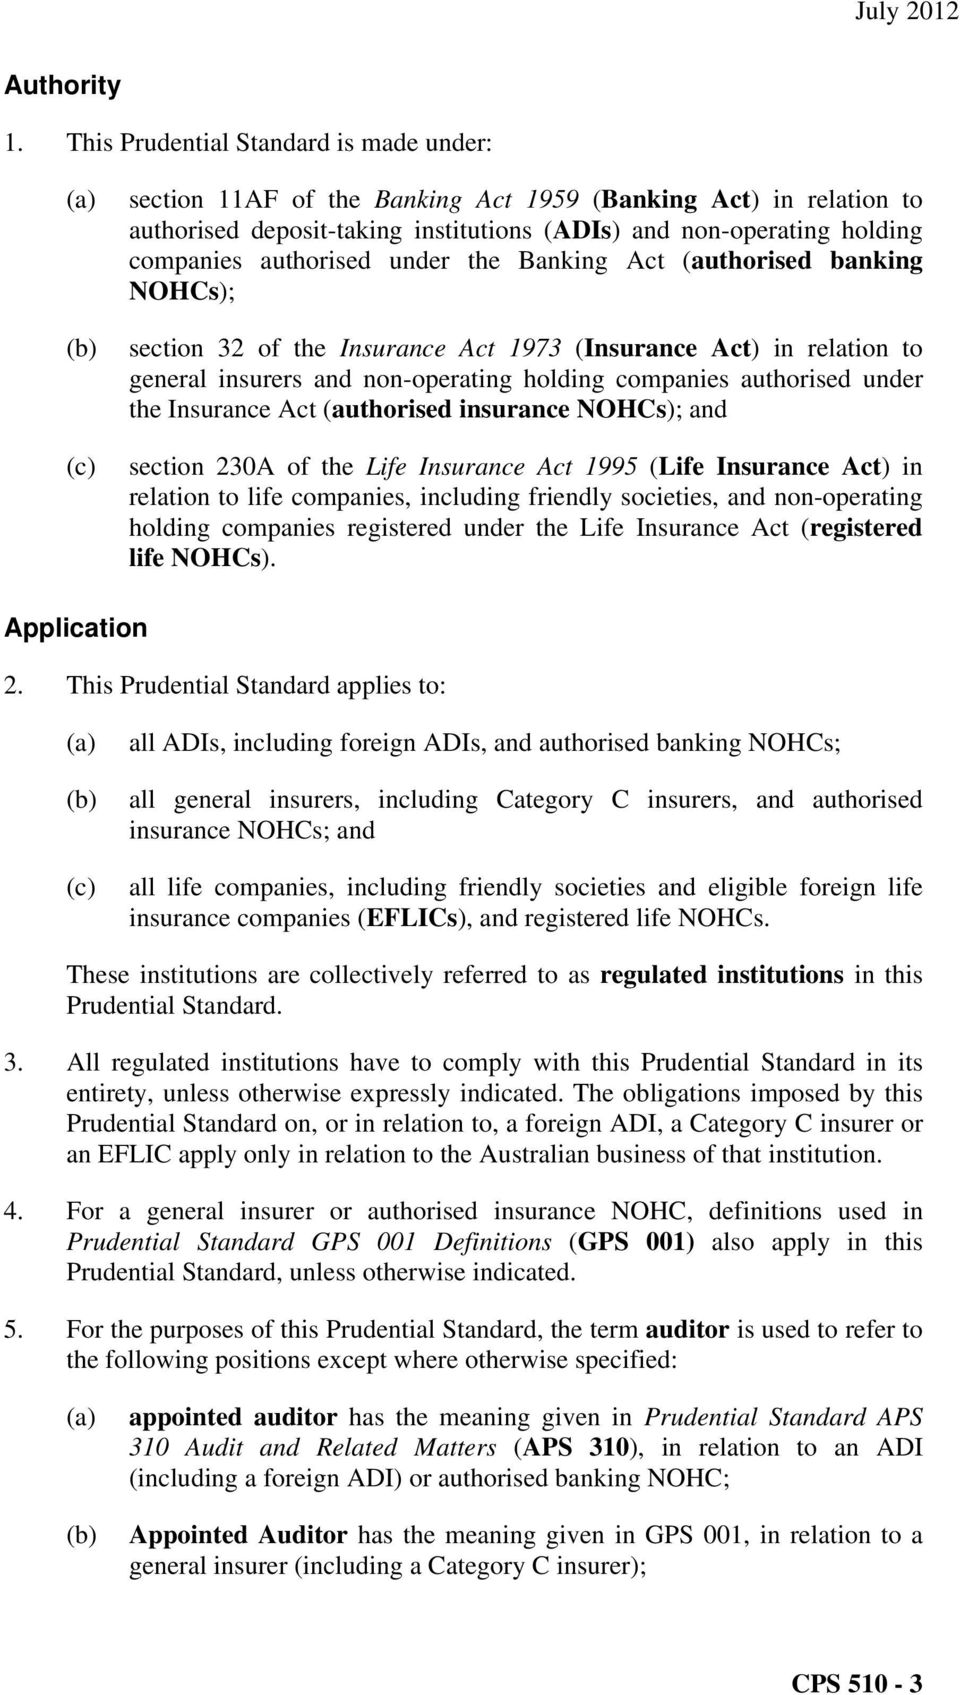 under the Banking Act (authorised banking NOHCs); section 32 of the Insurance Act 1973 (Insurance Act) in relation to general insurers and non-operating holding companies authorised under the